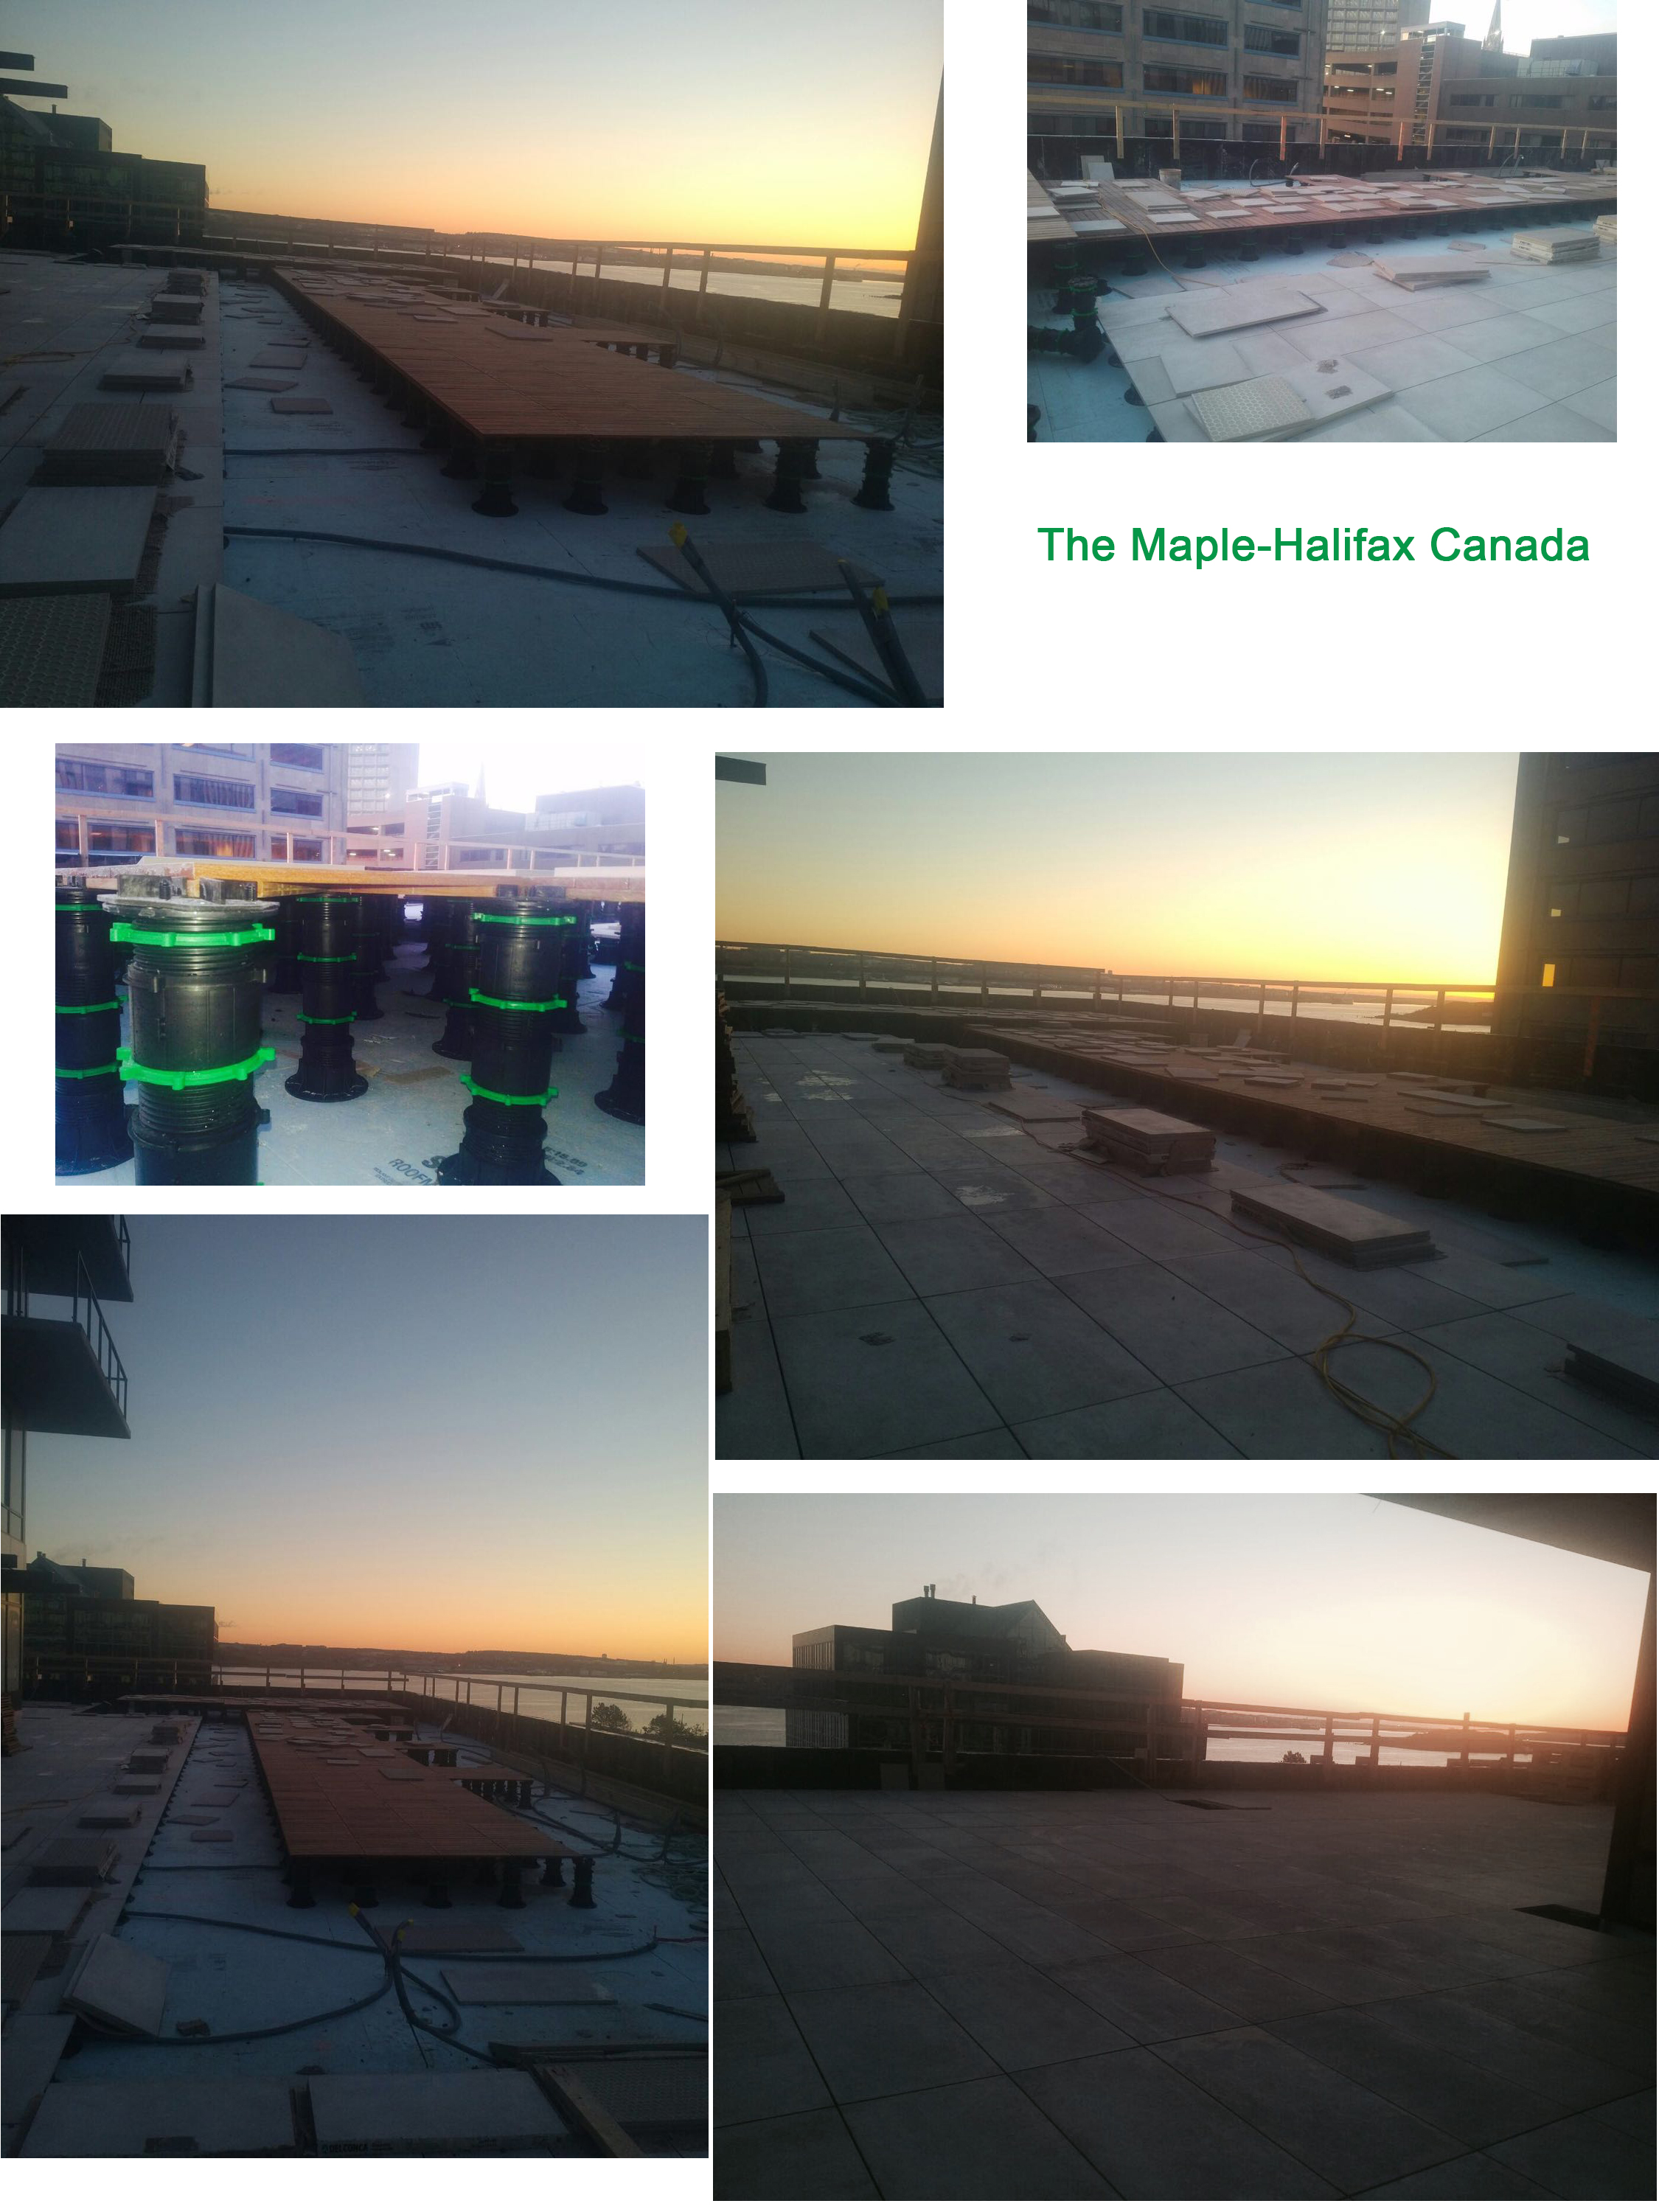 The Maple-Halifax Canada project